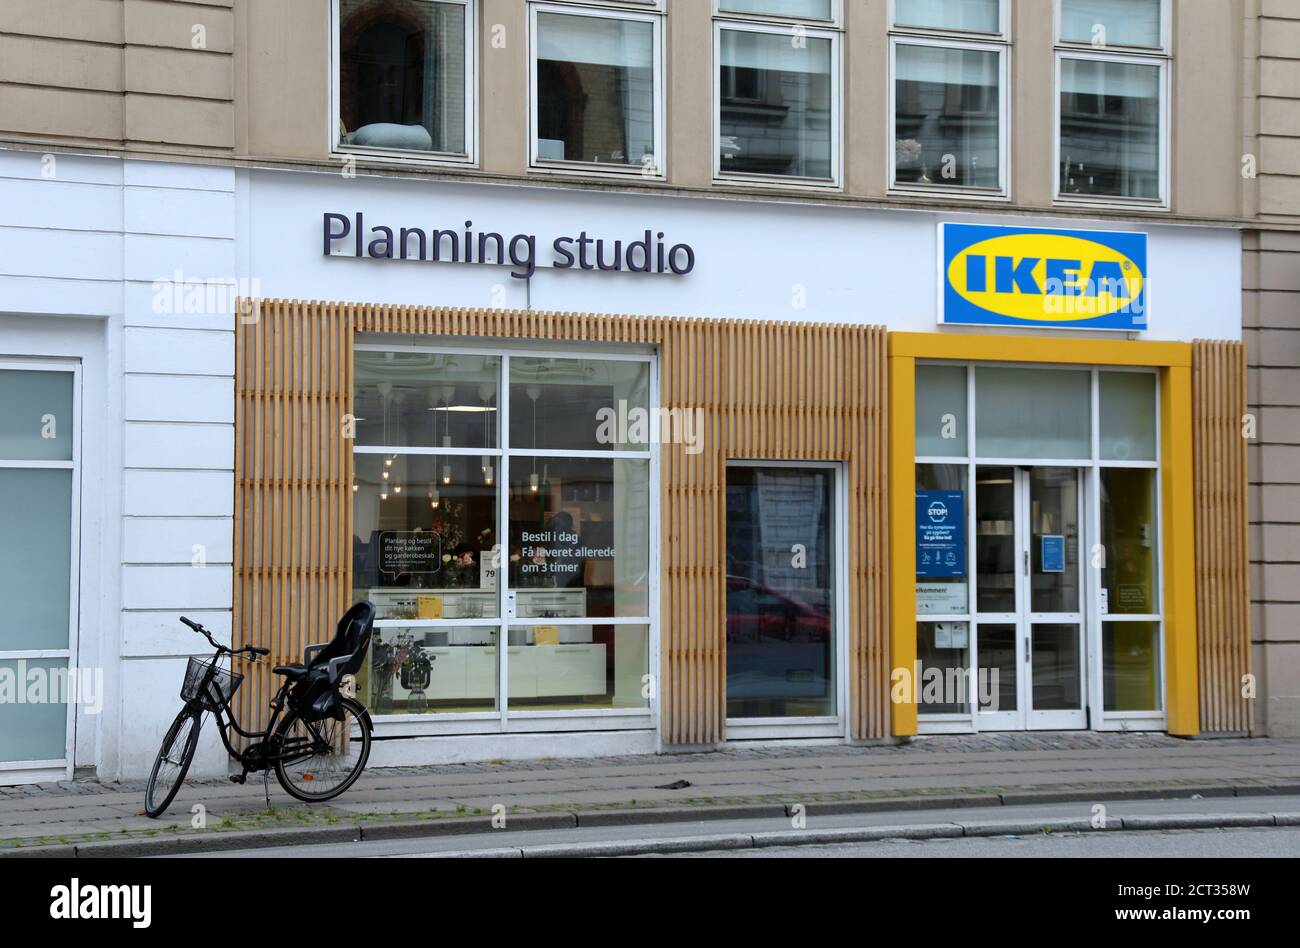 Ikea Planning Store High Resolution Stock Photography and Images - Alamy